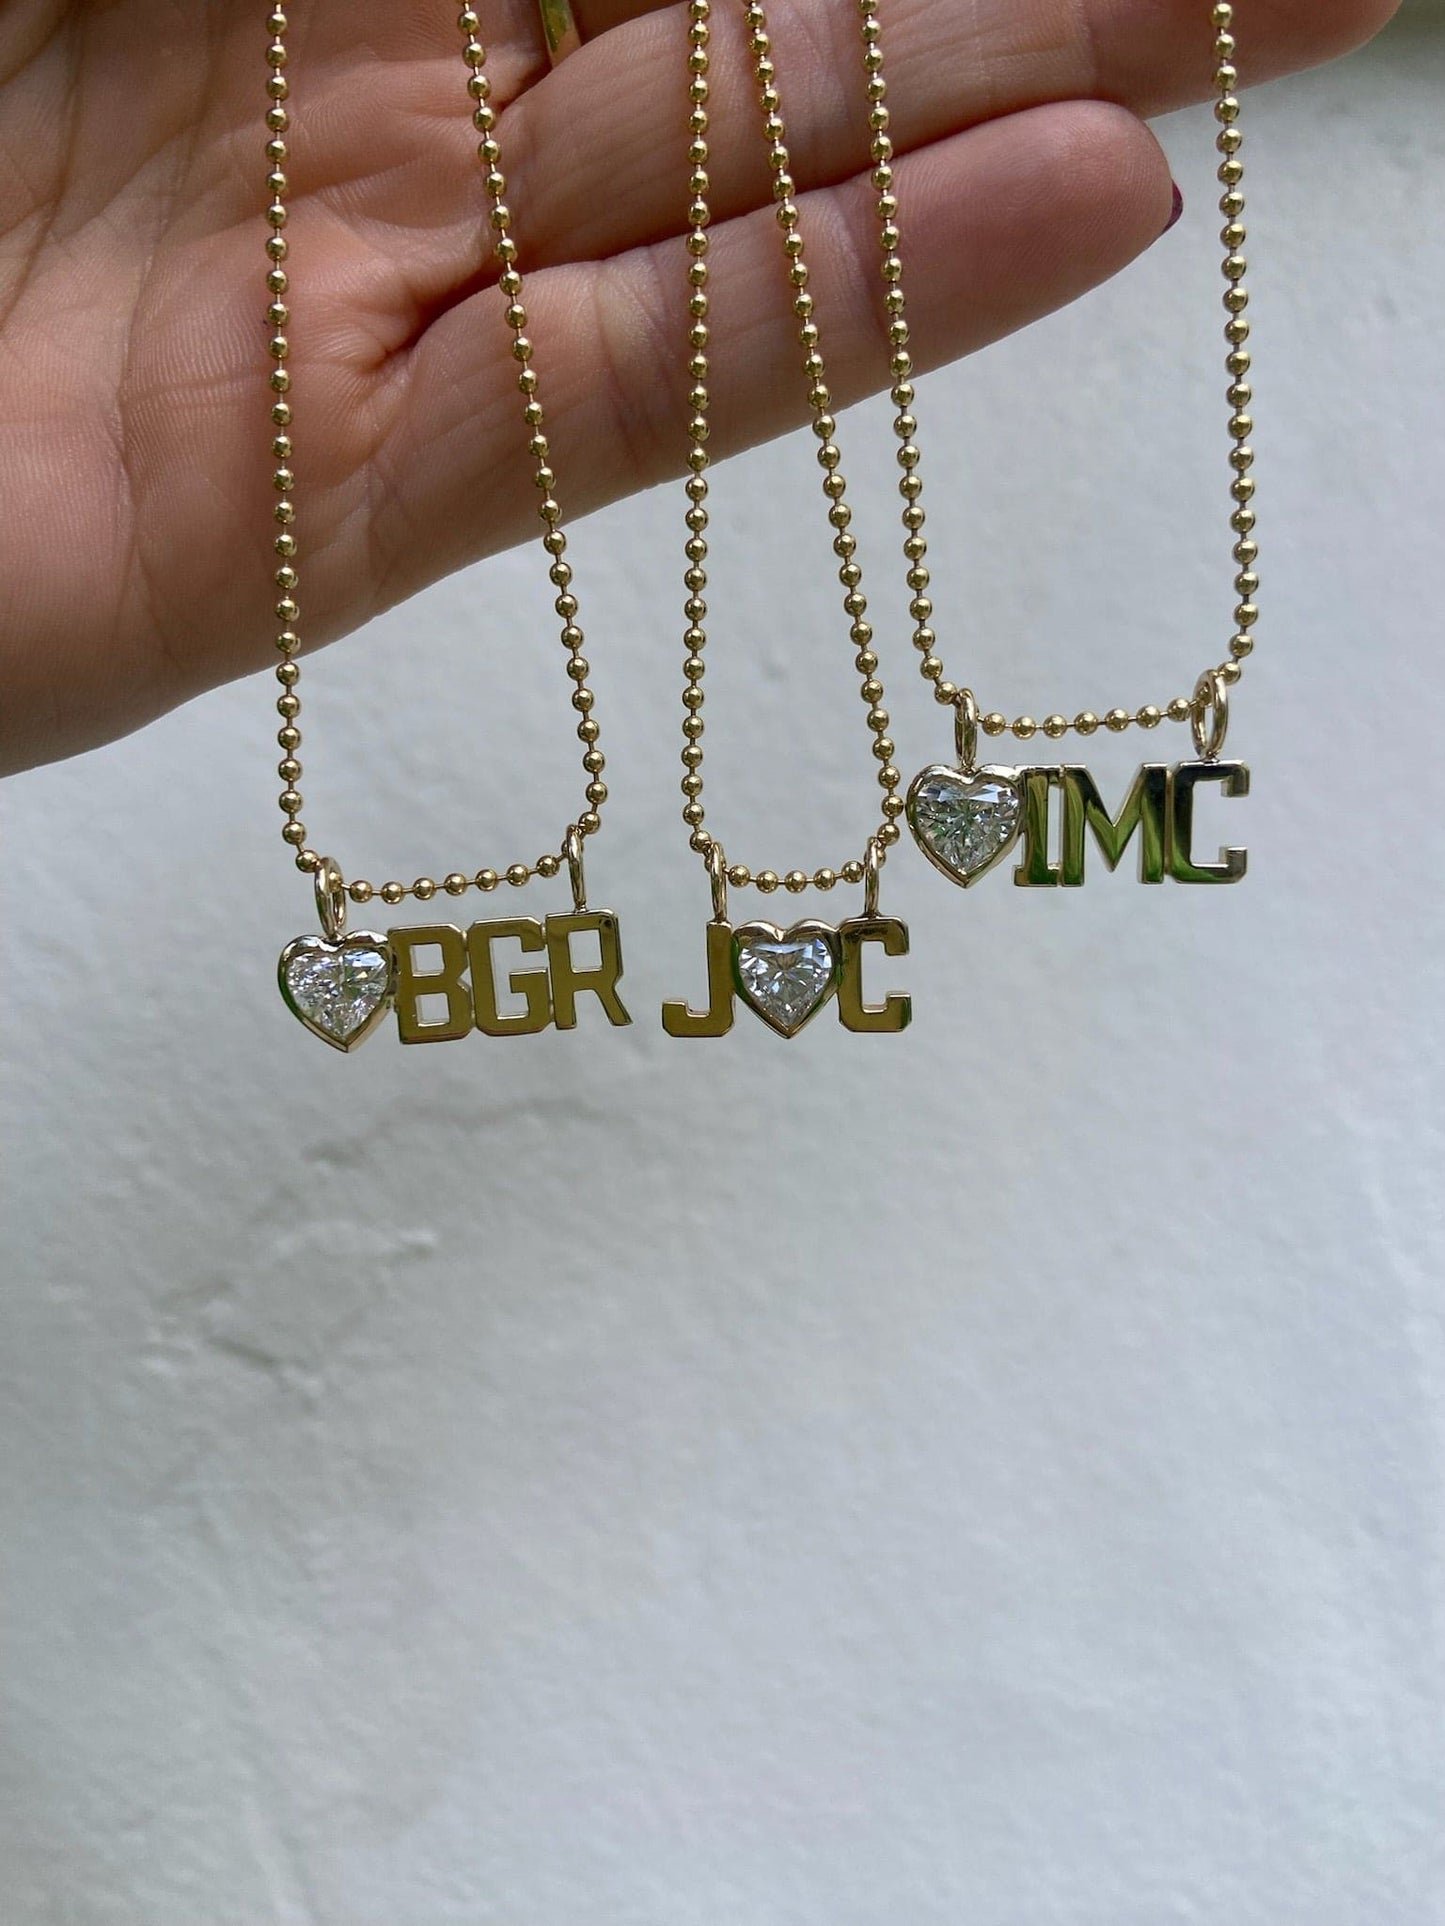 the three letter sweetheart pendant